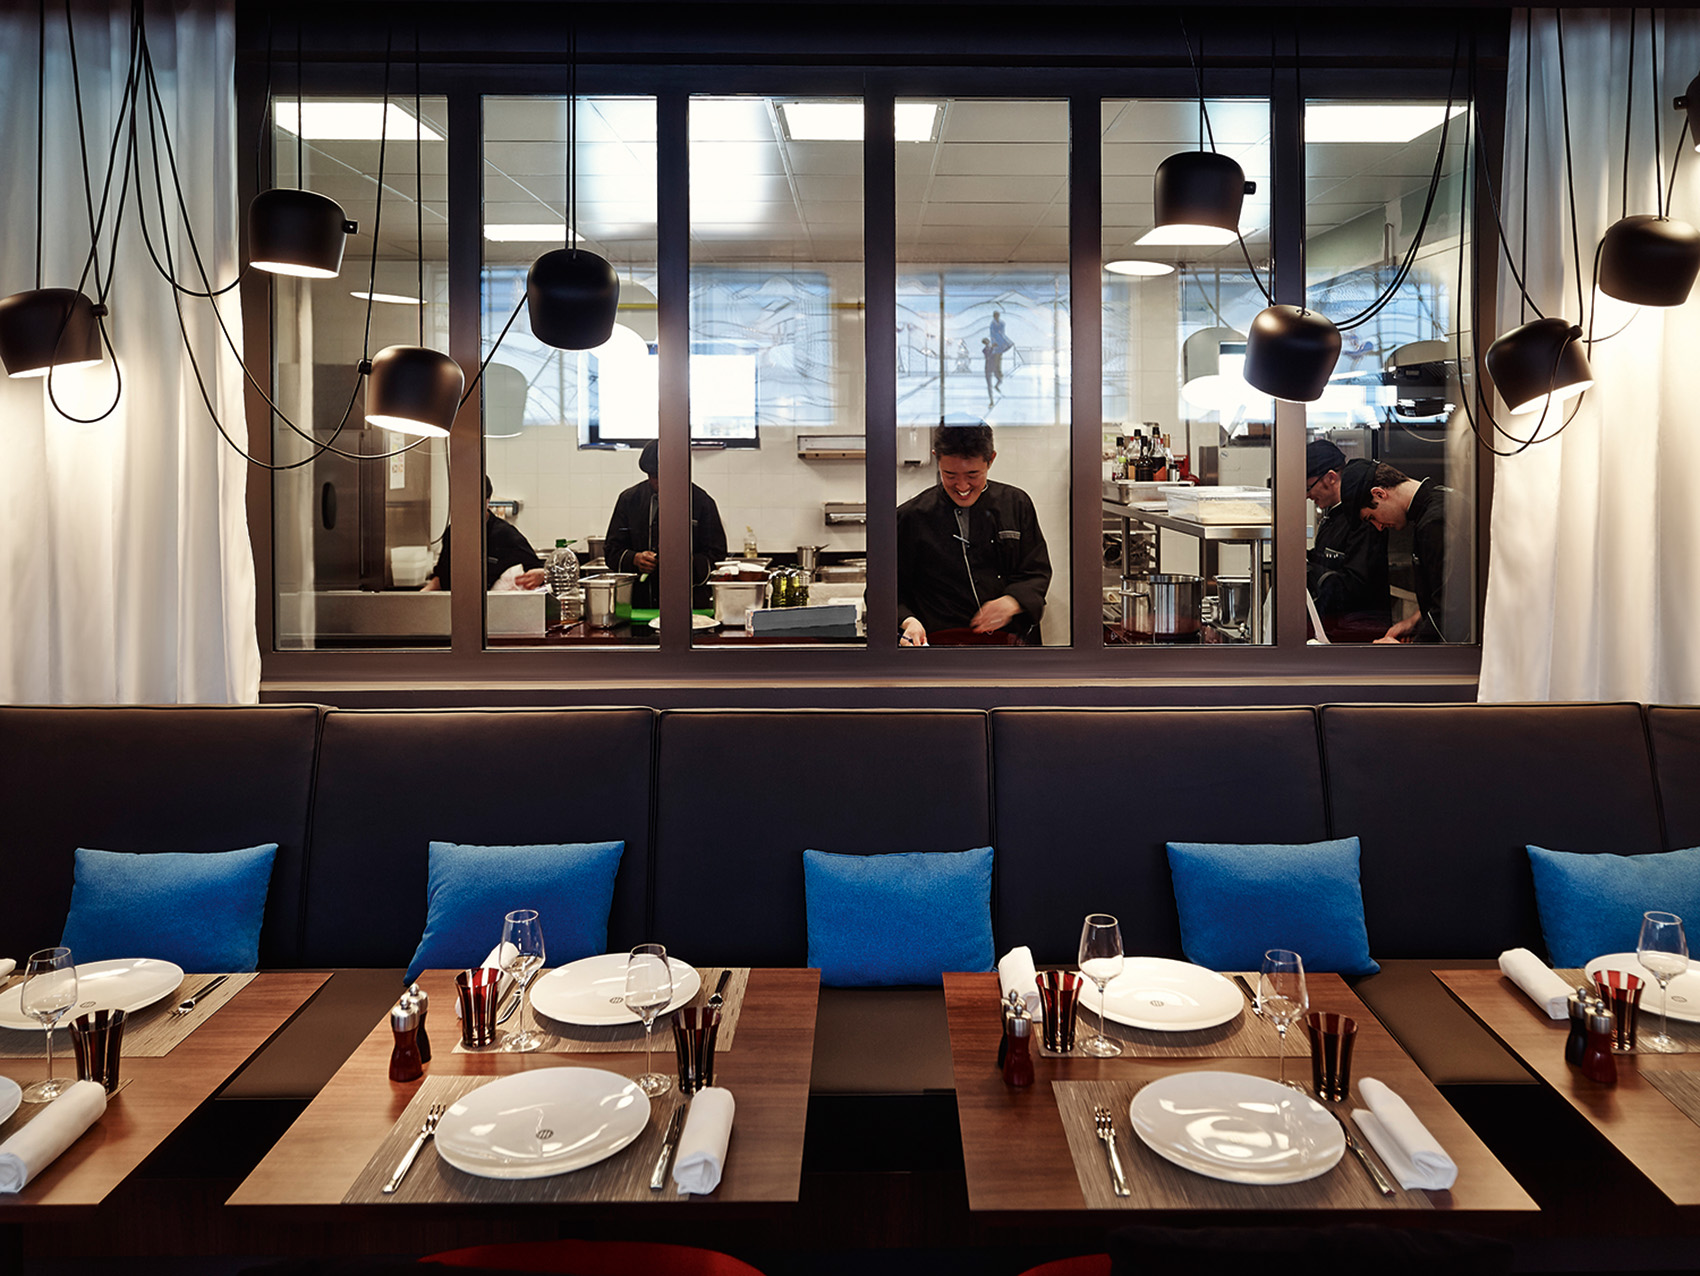 Open kitchen of the urban brasserie of the molitor hotel in Paris, luxury lifestyle hotel designed by the interior design studio jean-philippe nuel, interior design inspired by streetart